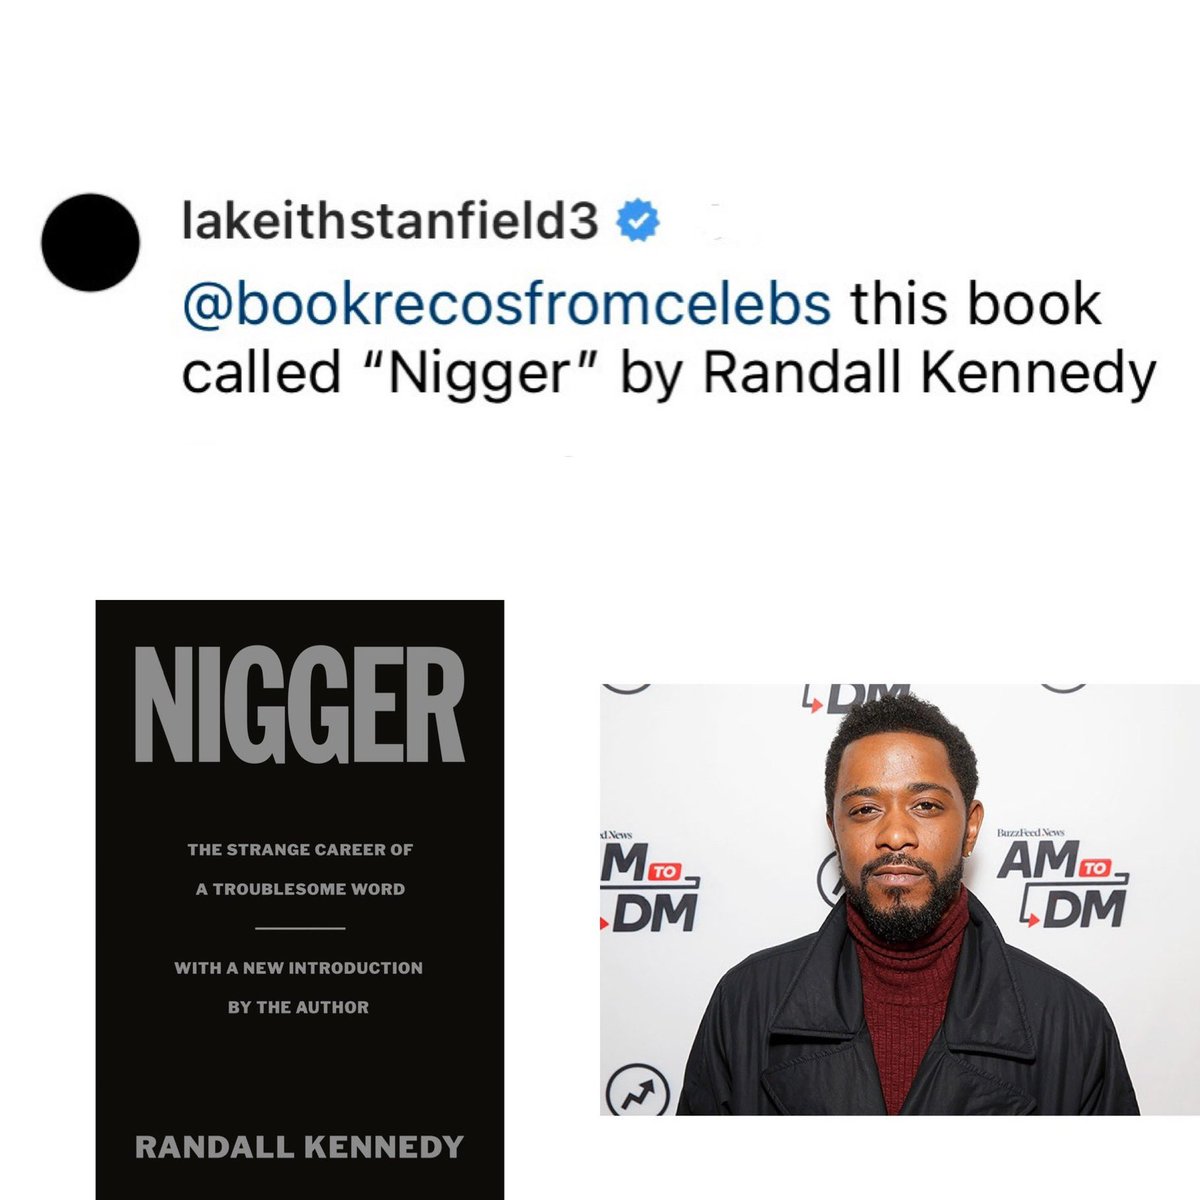 LaKeith Stanfield reading “N*gger: The Strange Career of a Troublesome Word” by Randall Kennedy #BookRecosFromCelebs #readmore #read #booktwitter #lakeithstanfield #atlantafx #randallkennedy #etymology #judasandtheblackmessiah #blackexcellence #sorrytobotheryou #harvardlaw #nword